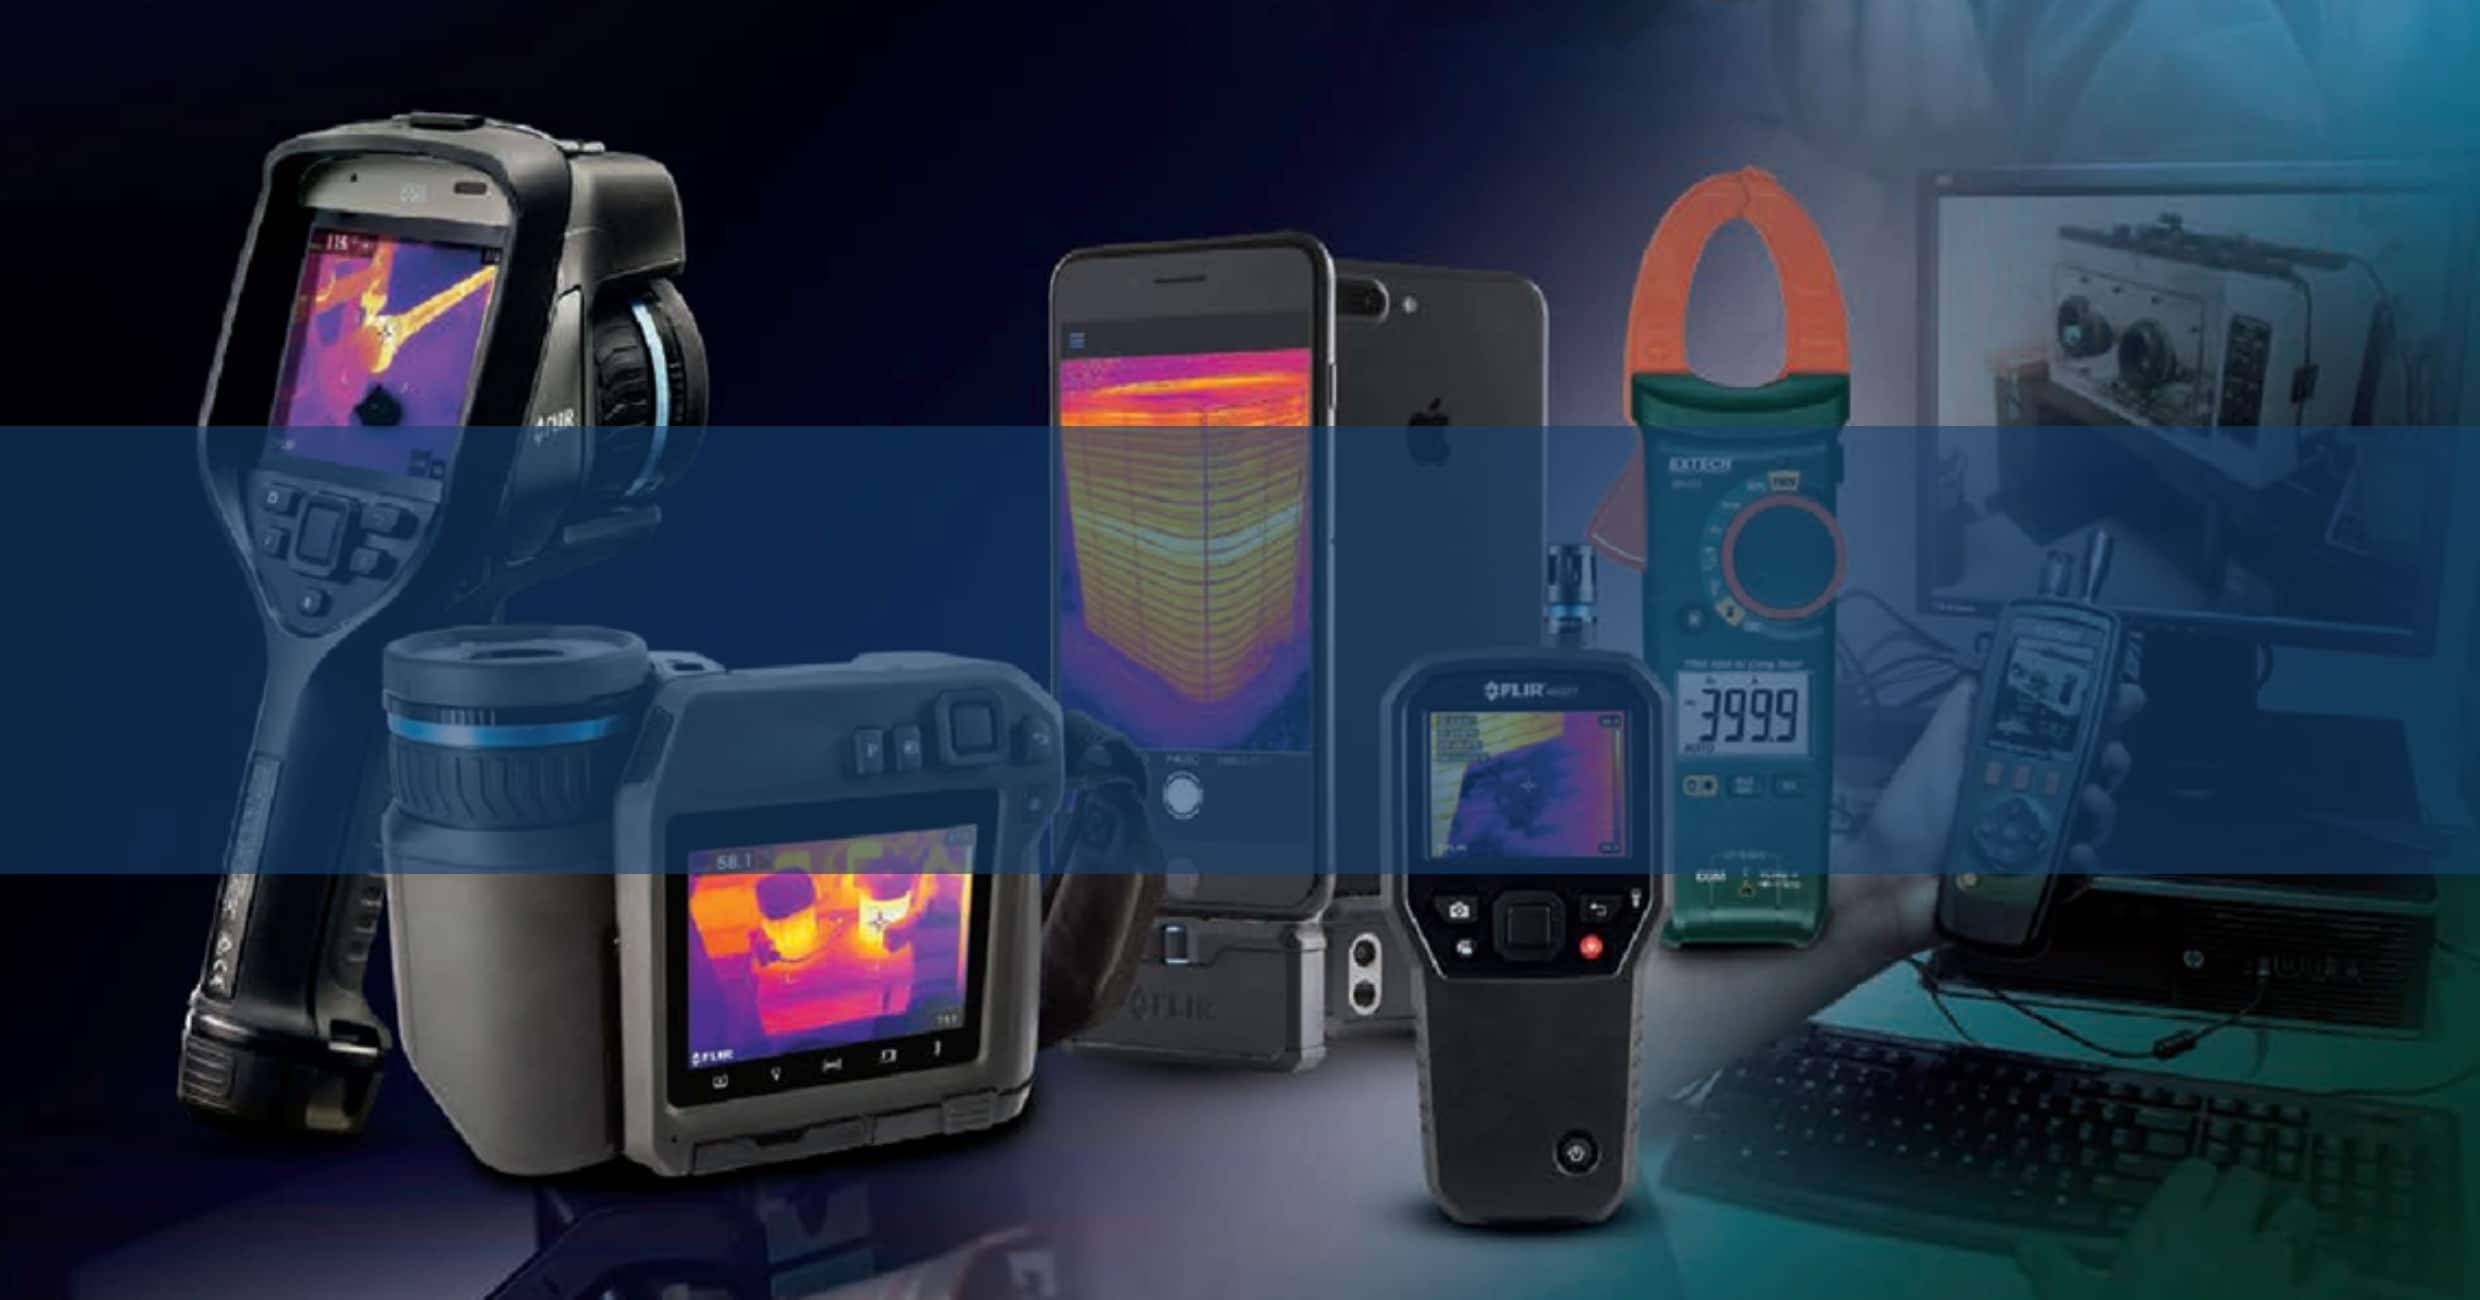 FLIR Test and Measurement Products Guide